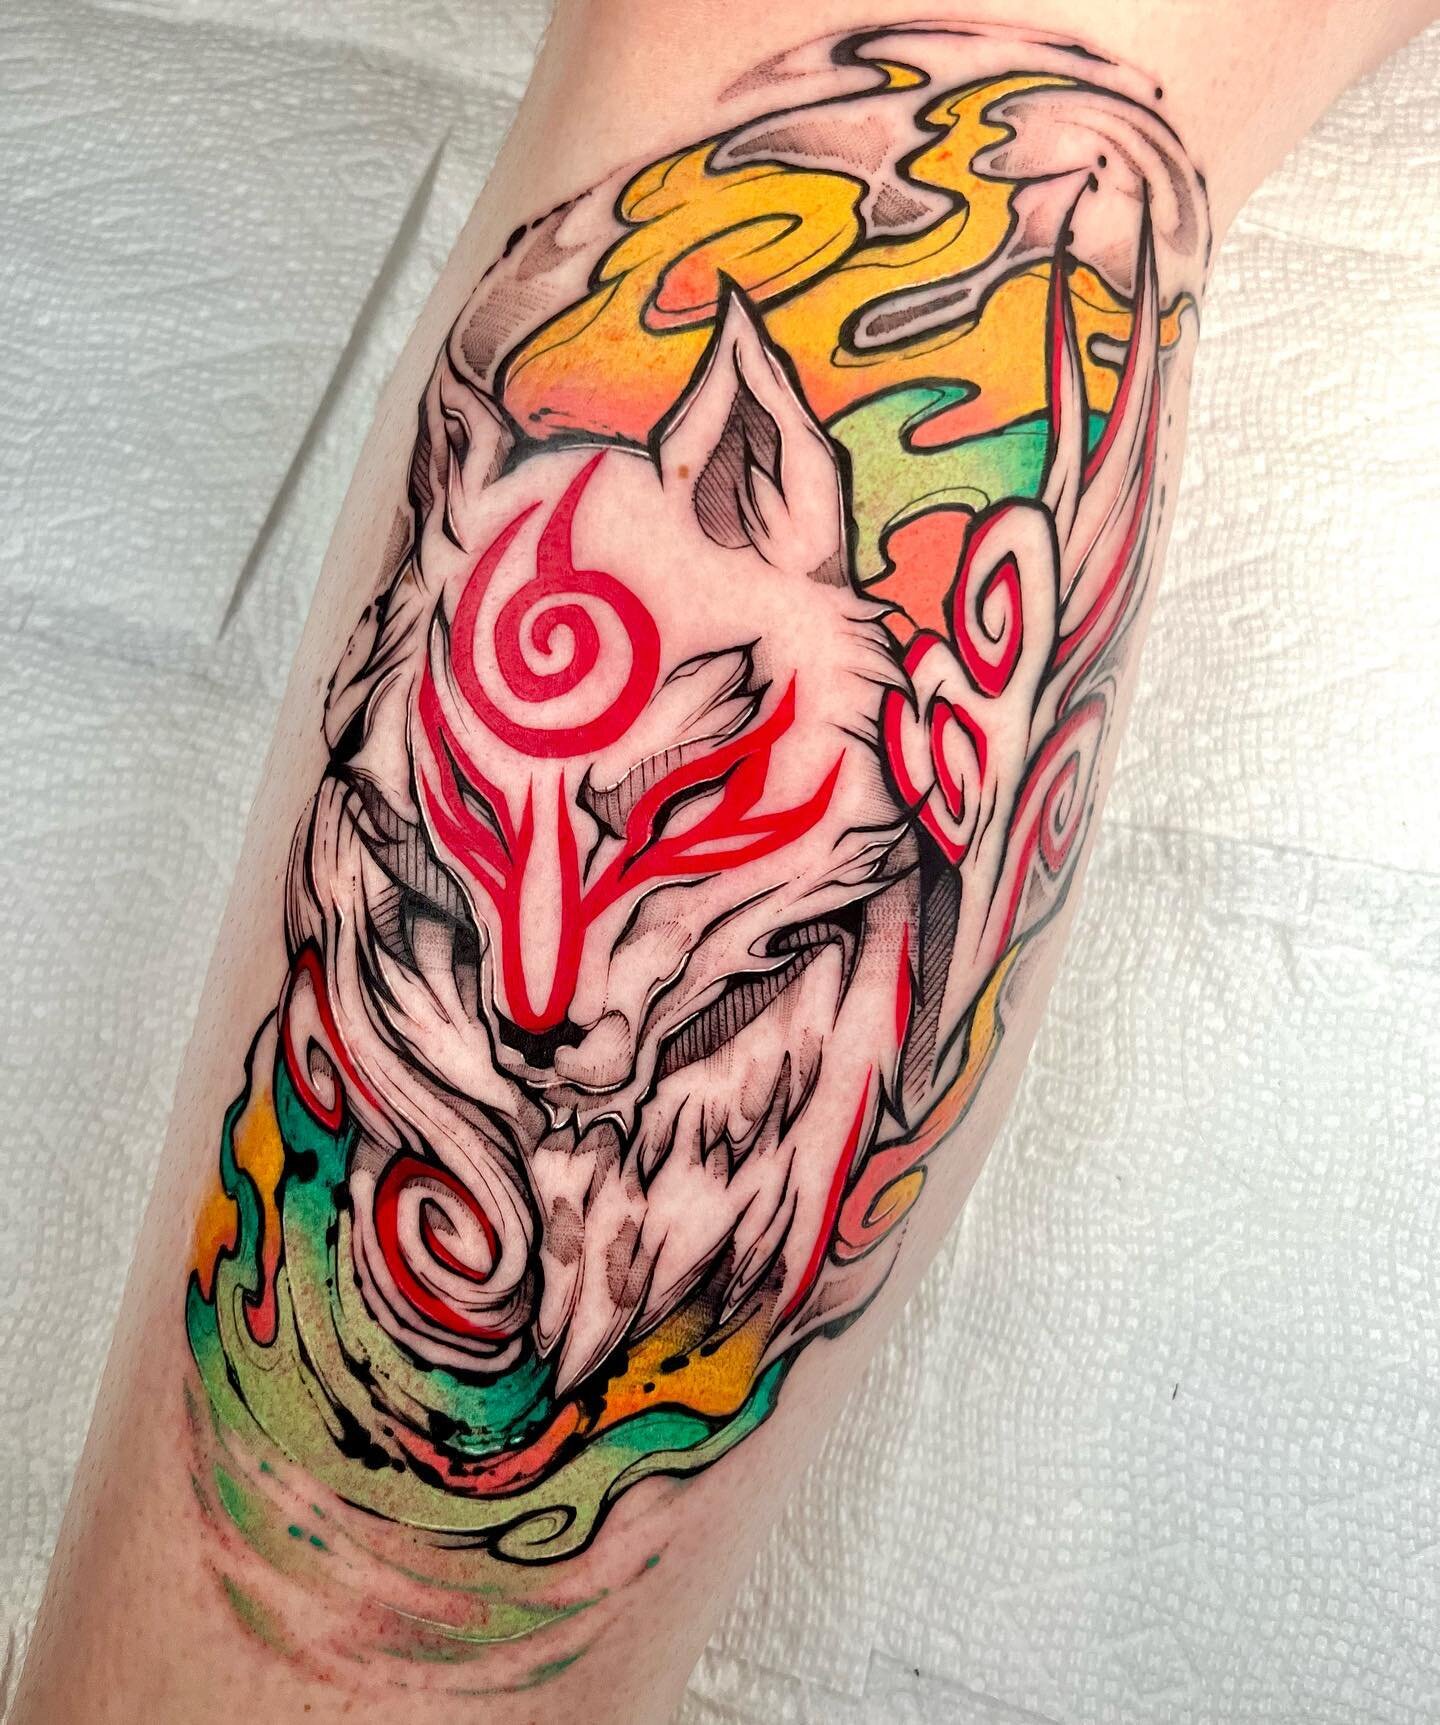 Thank you @kaijukoffee for letting me tattoo Shiranui from Okami! I *love* Okami, I probably played through it 5 or 6 times as a kid, so every chance I get to tattoo from it makes my day! I even did a bunch of color since I love it so much 
.
.
.
I&r